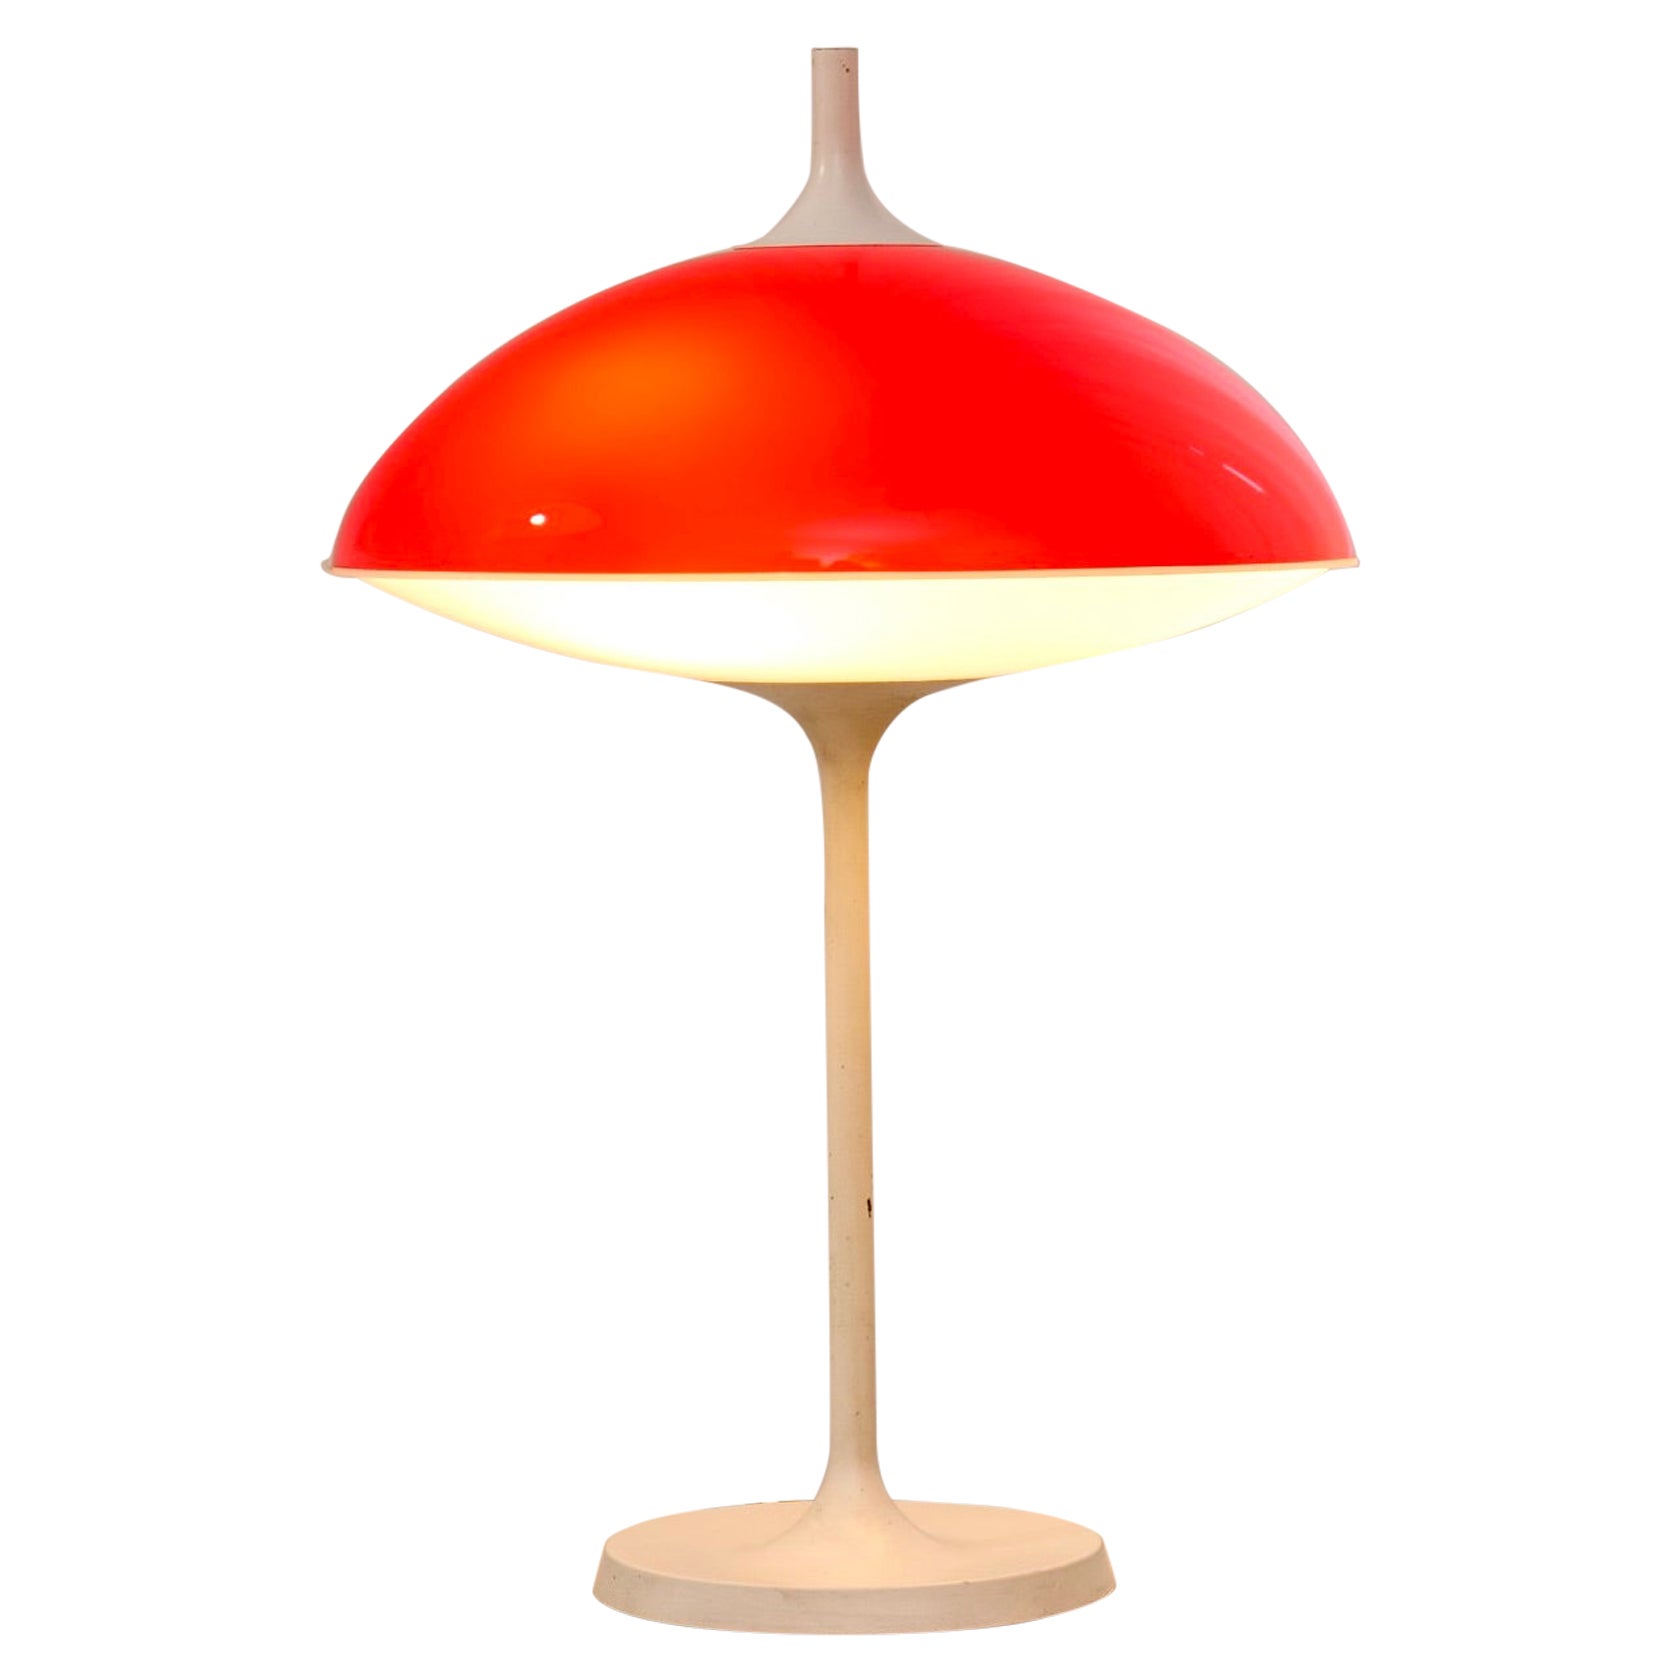 space age mushroom lamp by Temde - 1970s For Sale